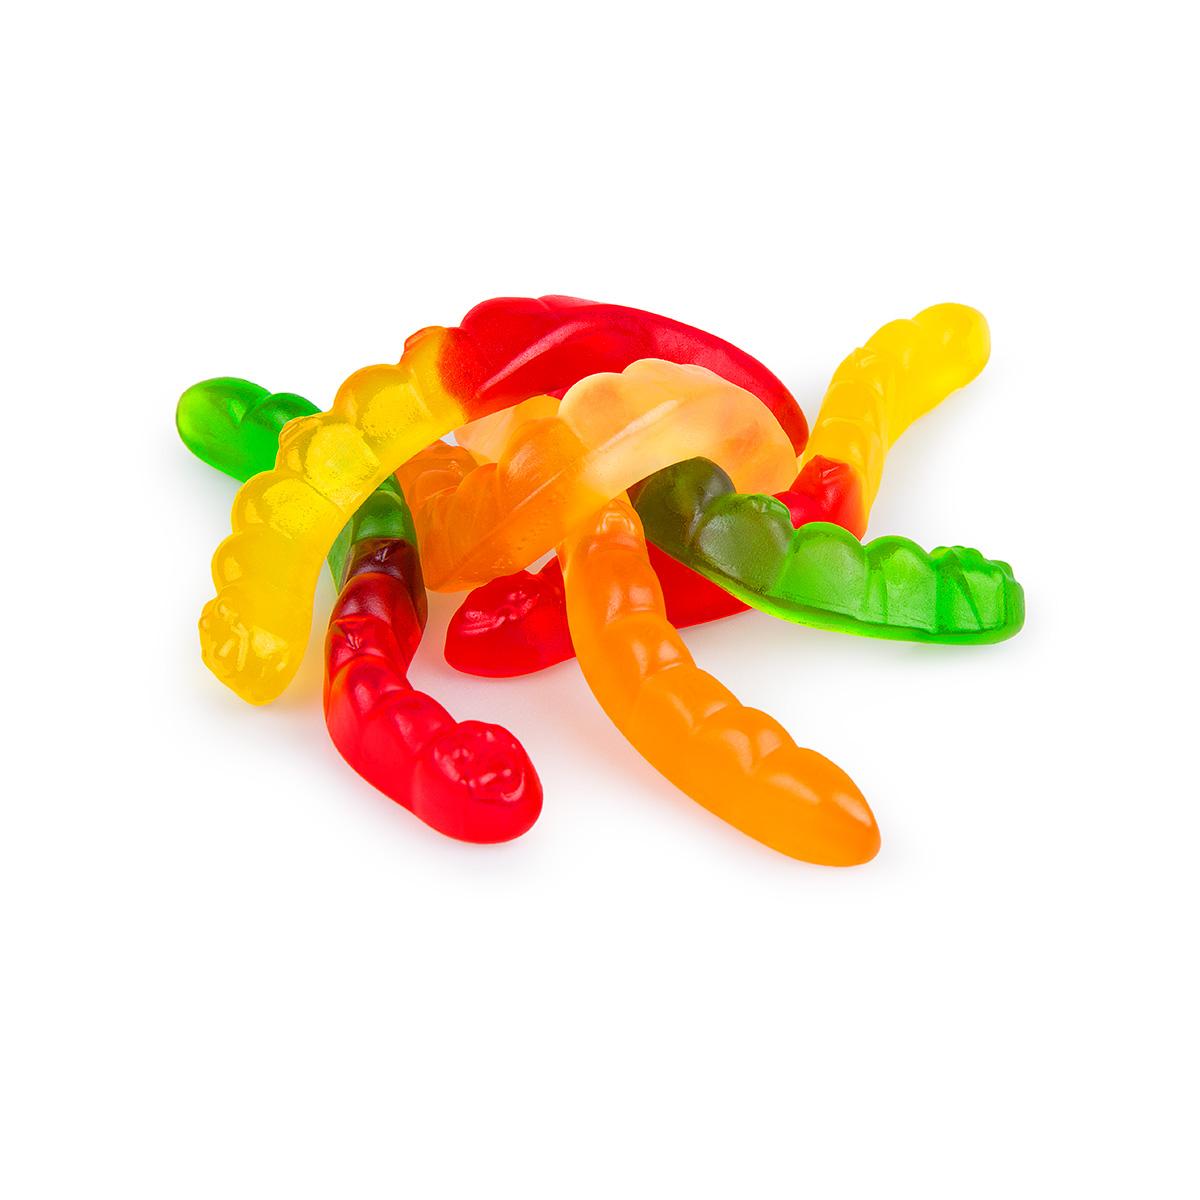  Gummie Fruit Worms Candy - 1 Lb.